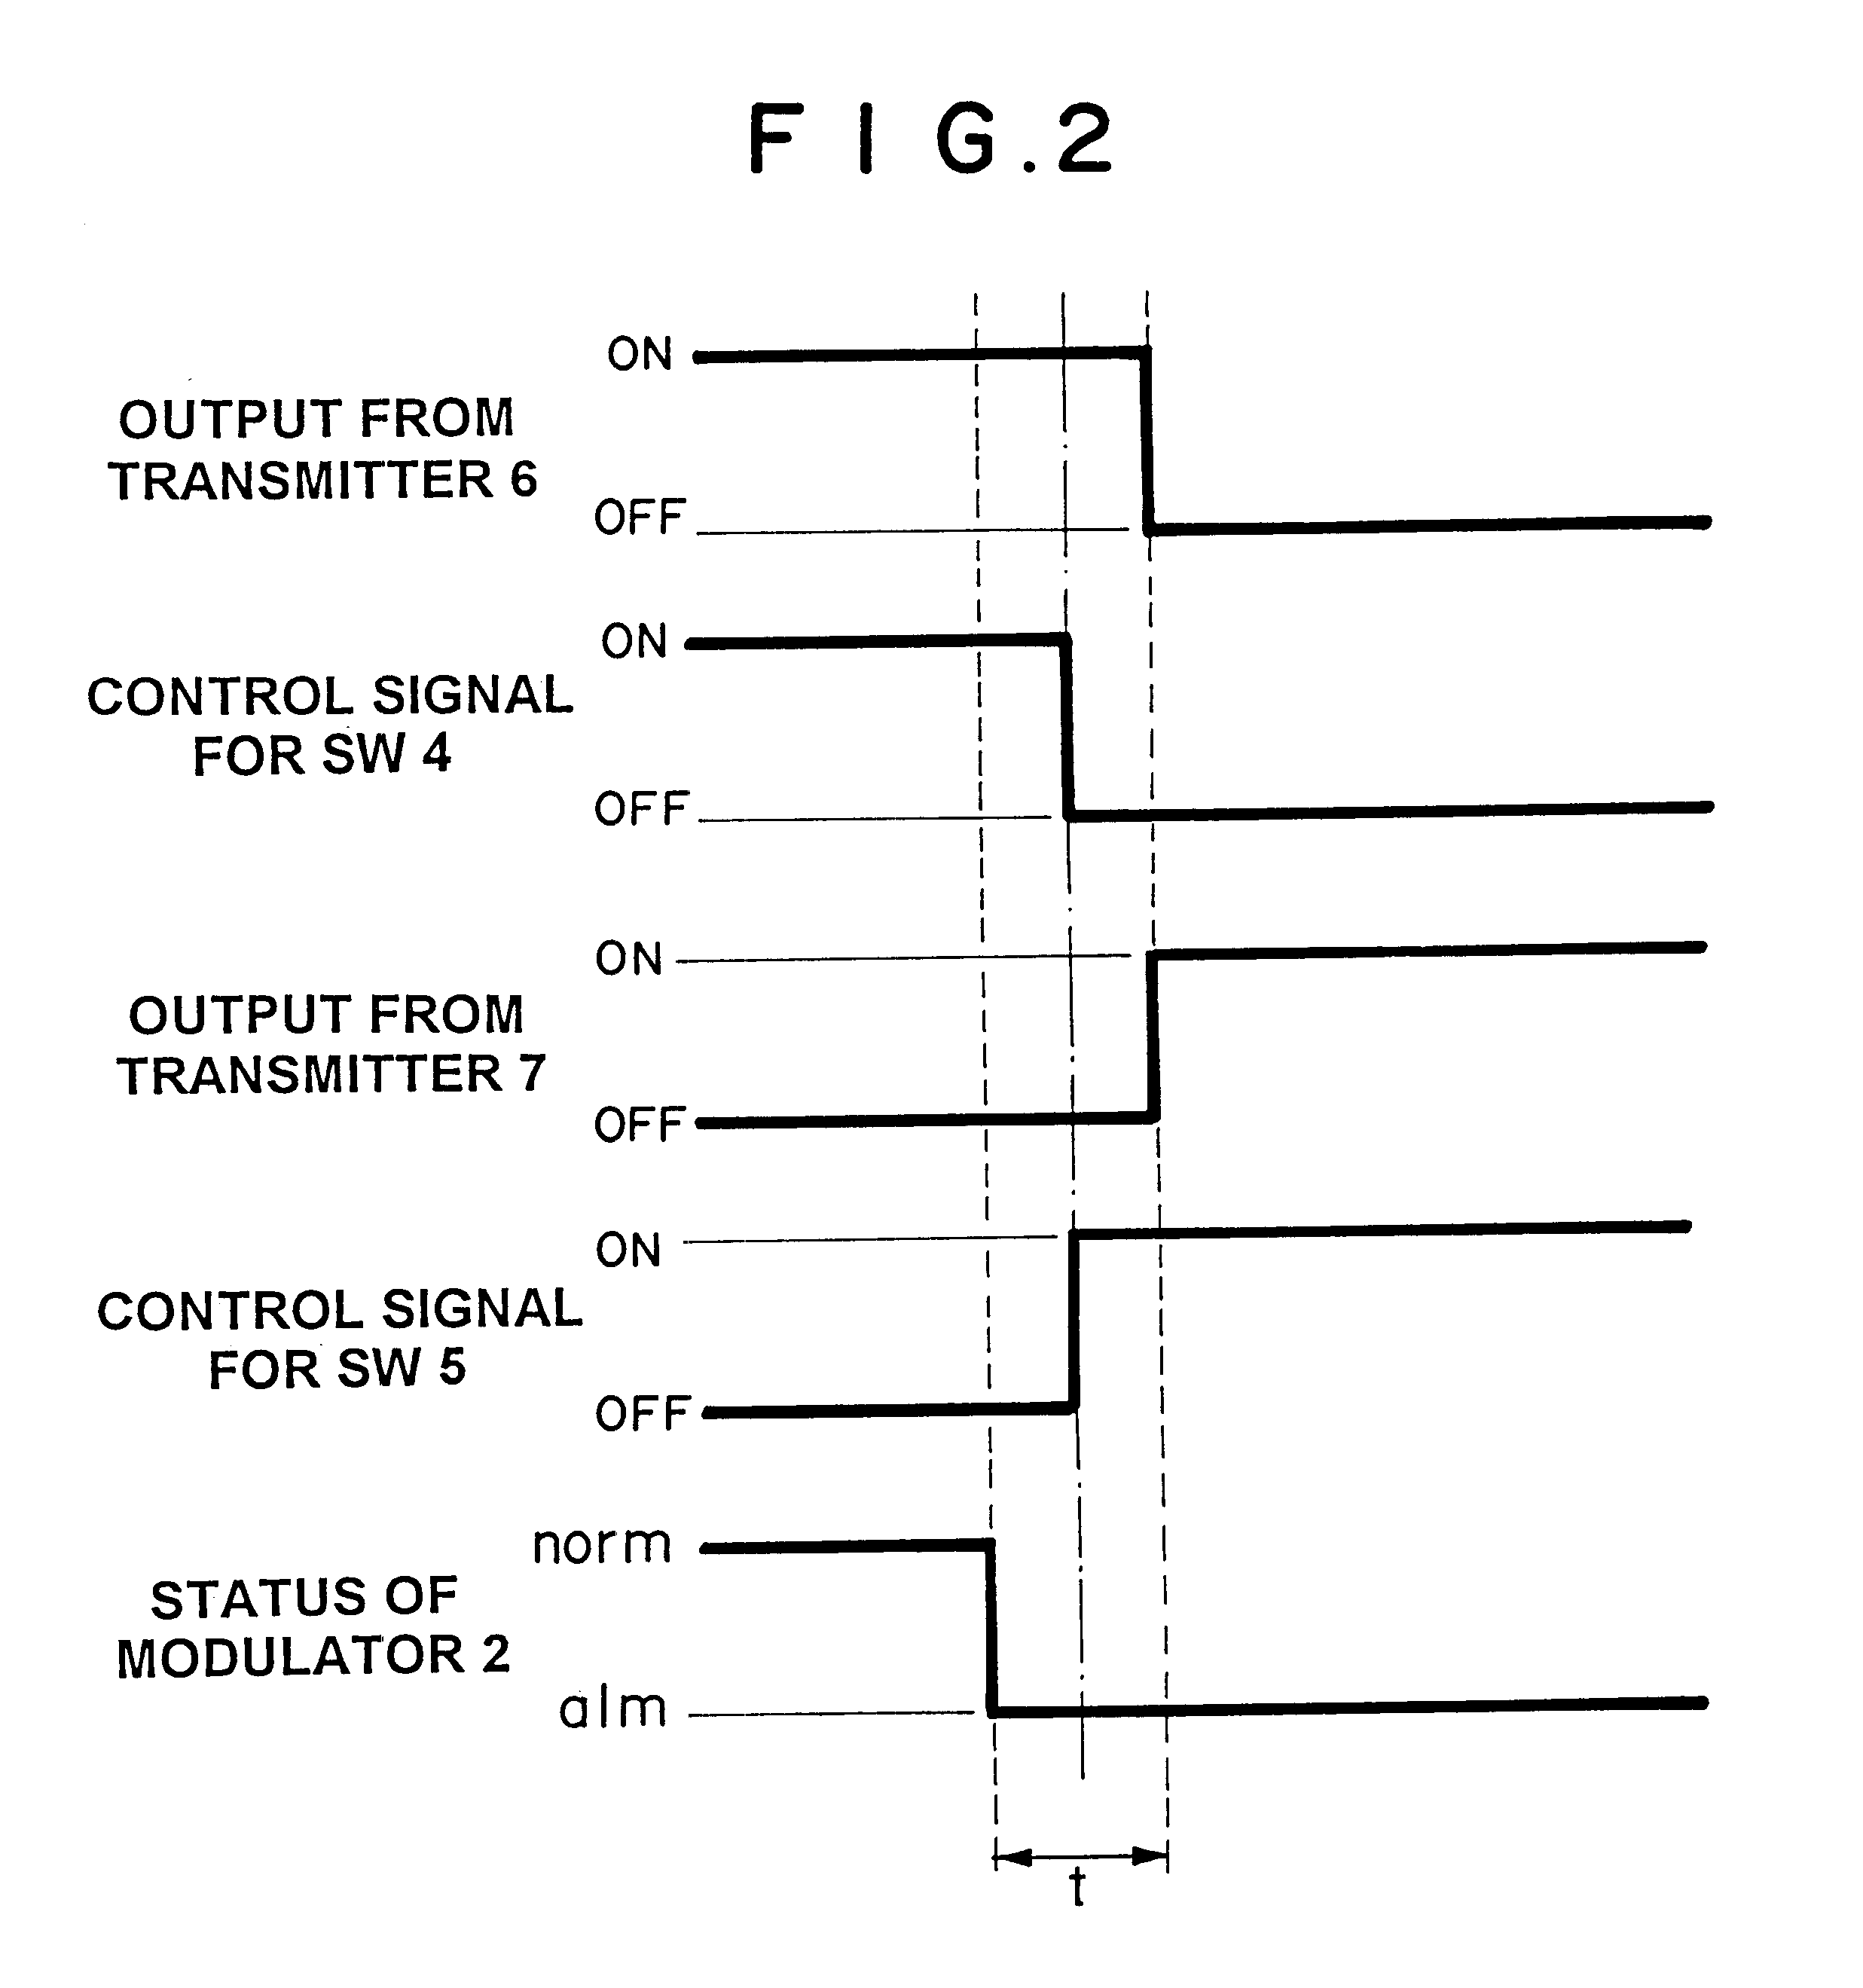 Hot stand-by switching apparatus